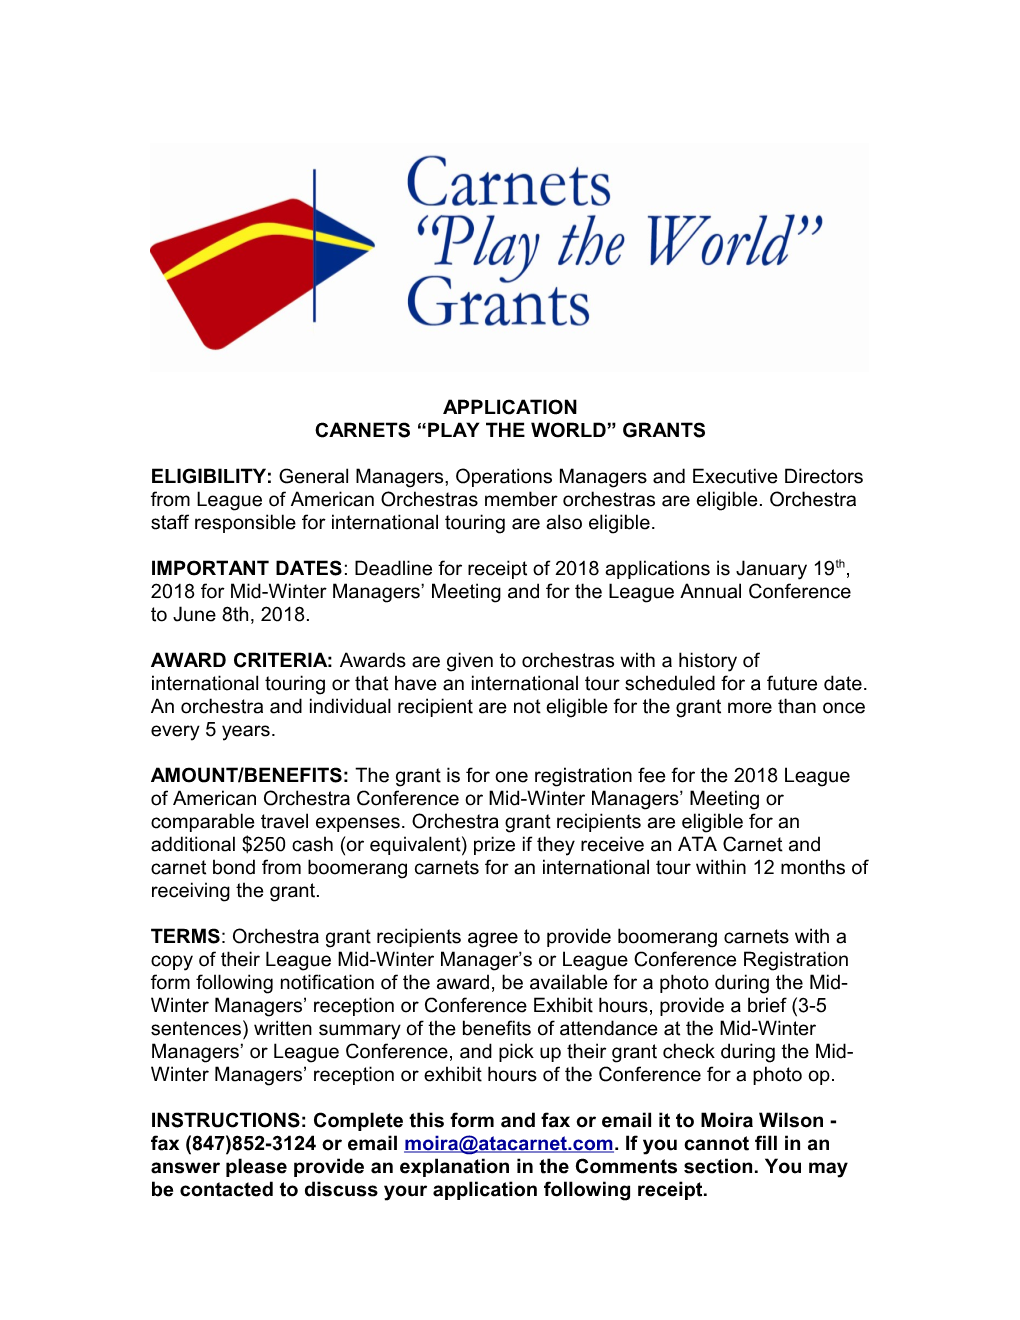 Carnets Play the World Grants